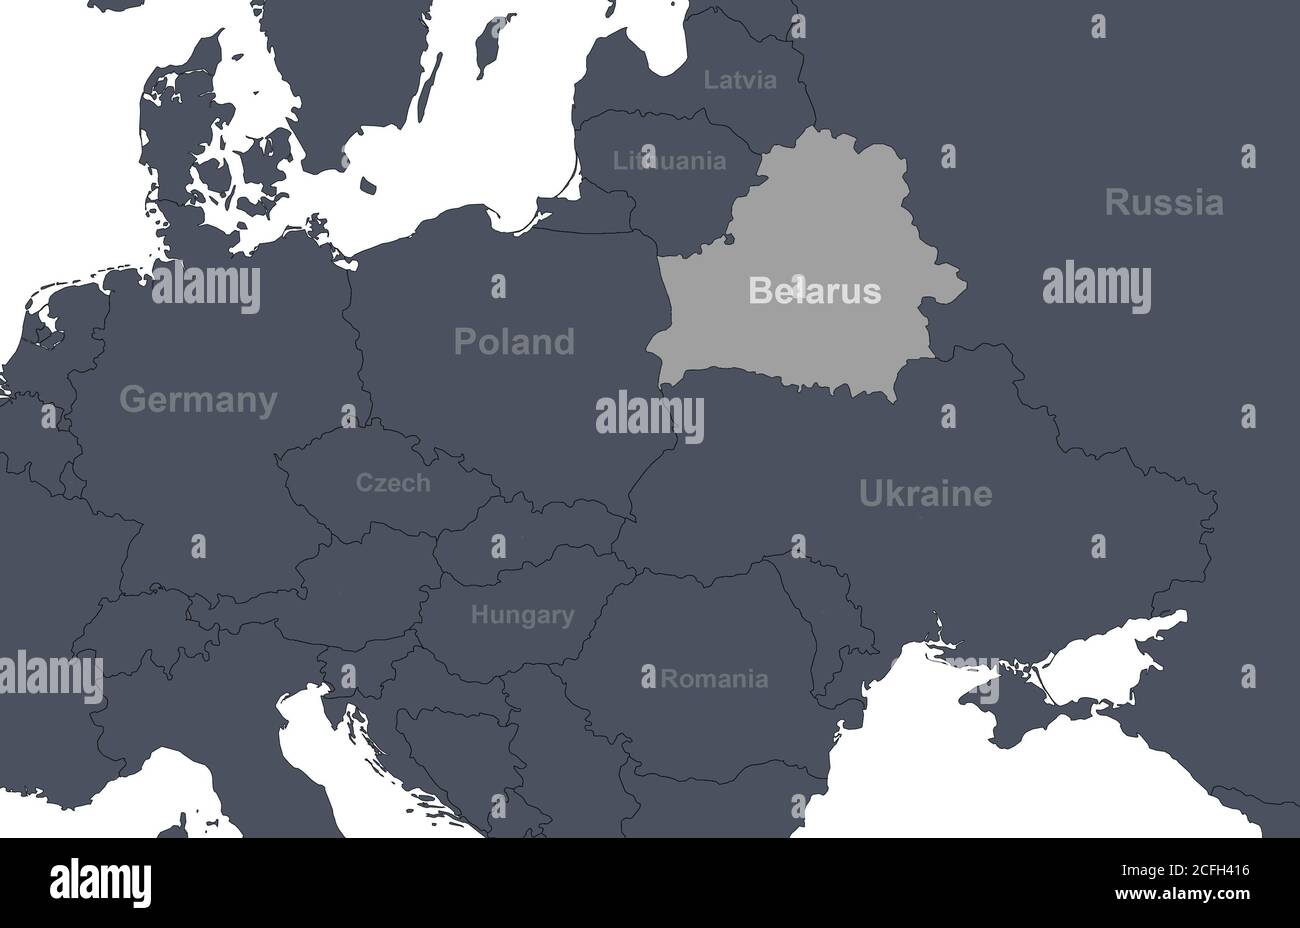 Belarus on Europe outline map with countries borders. Detail of World political map, central and eastern European region with silhouette. Earth isolat Stock Photo